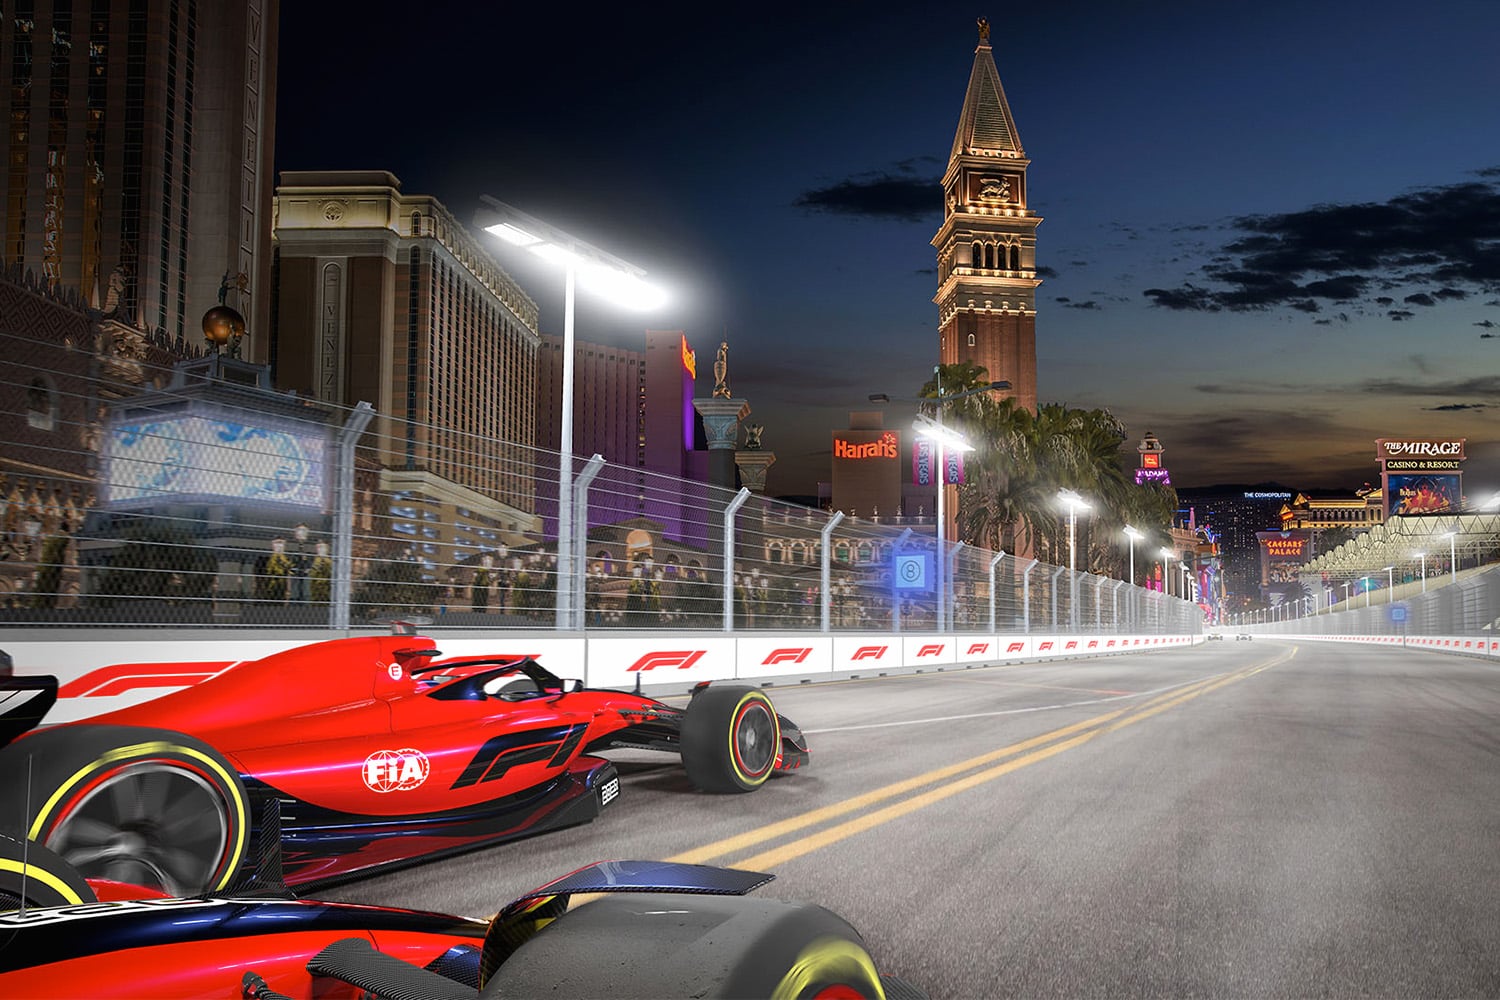 MGM to Offer F1 Las Vegas Grand Prix Packages at 100K